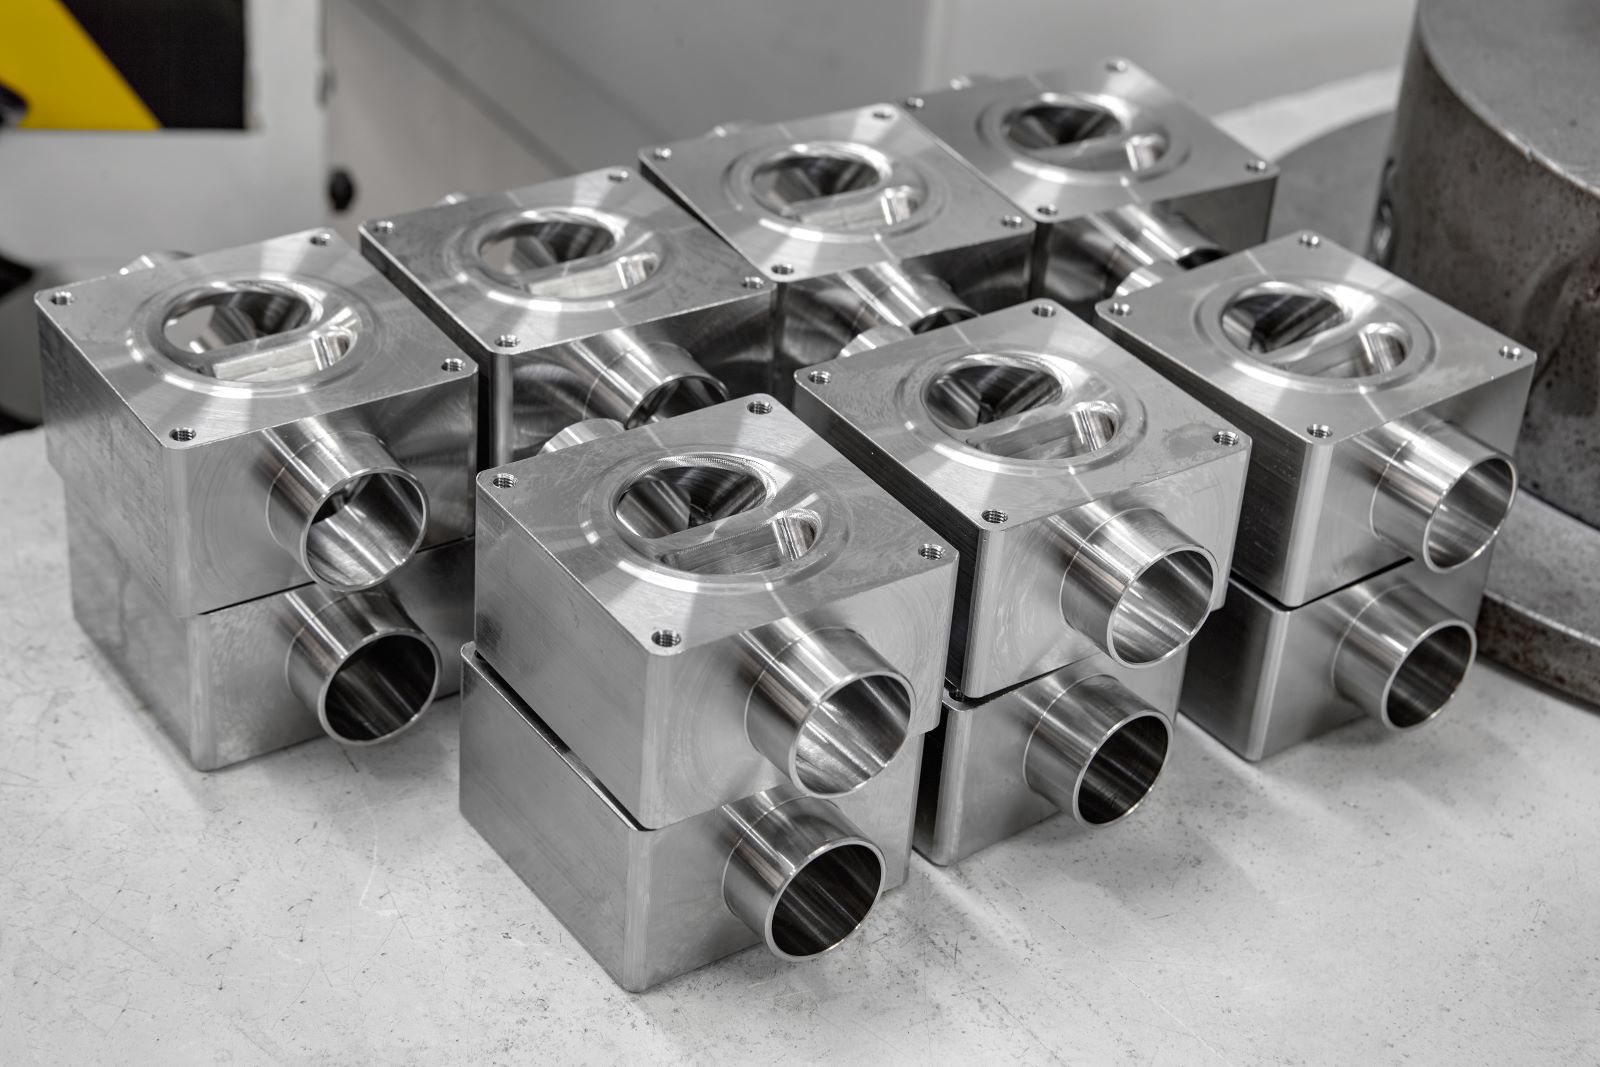 Aluminum Aerospace Machining Knoxville, TN | Aluminum Manufacturing Solutions near Knoxville, TN | Roberson Machine Company